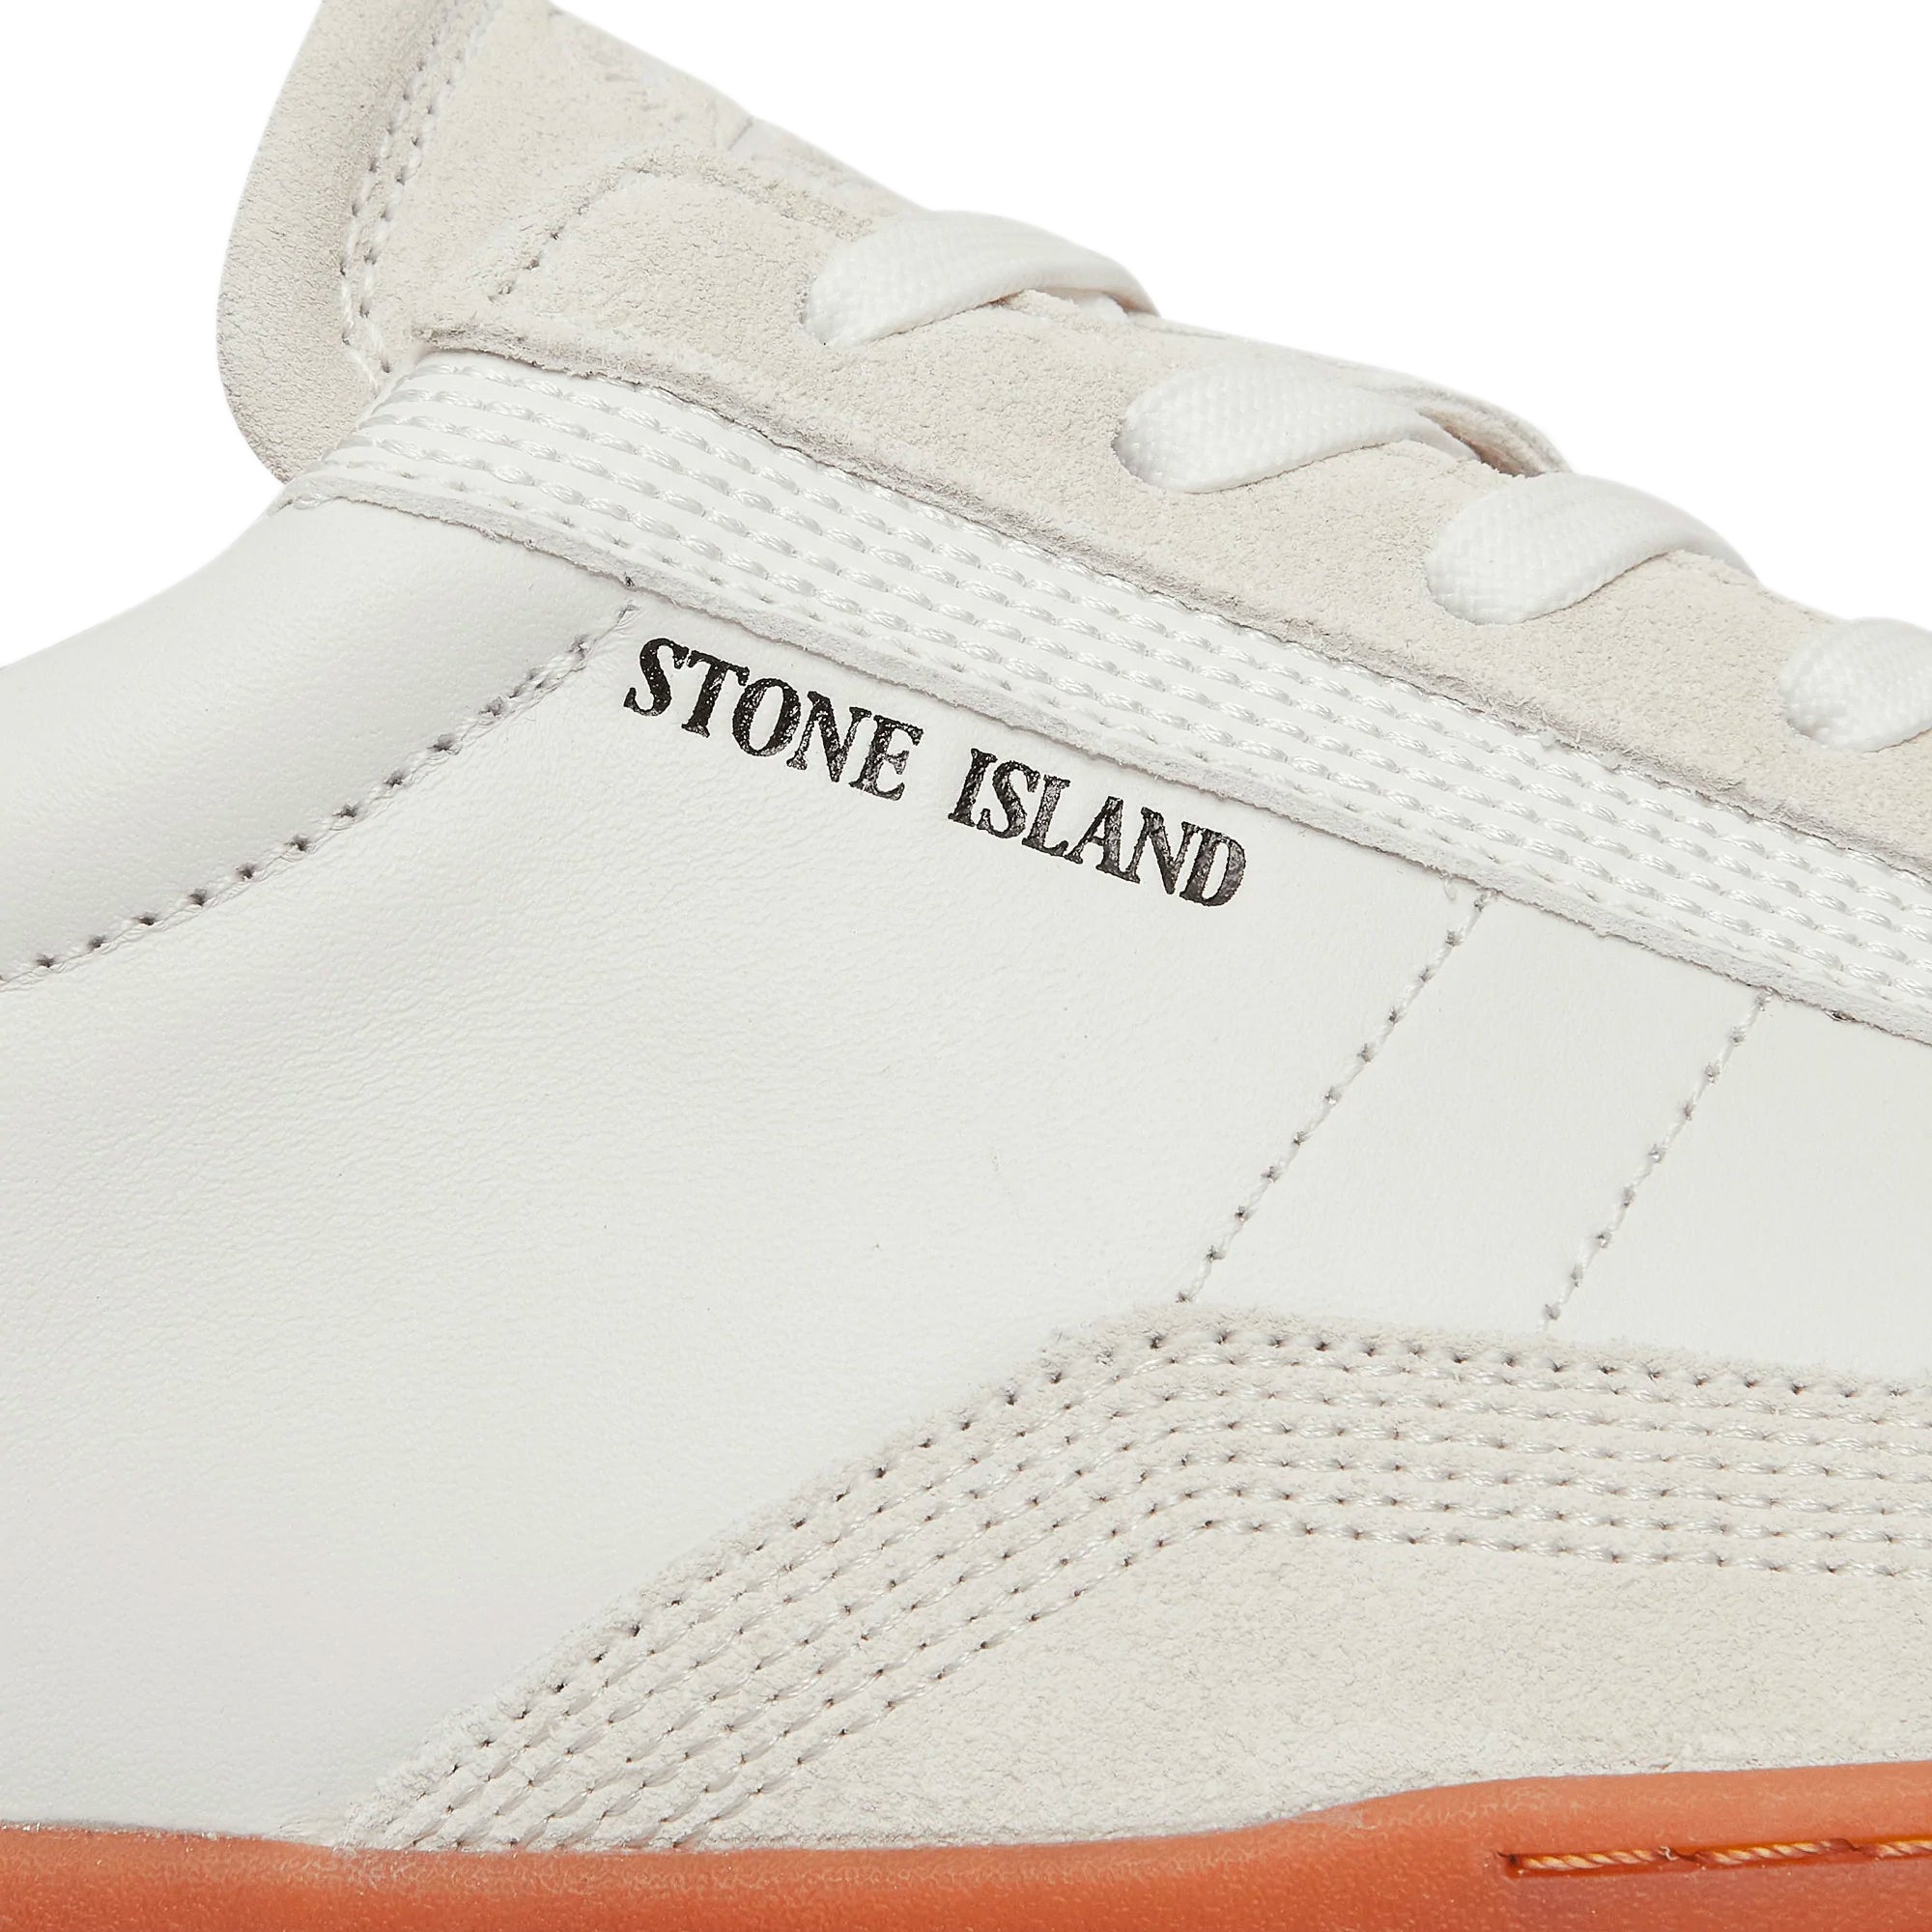 New Balance x Stone Island Fuel Cell RC V2 Elite Sneakers red white beige  10 | eBay